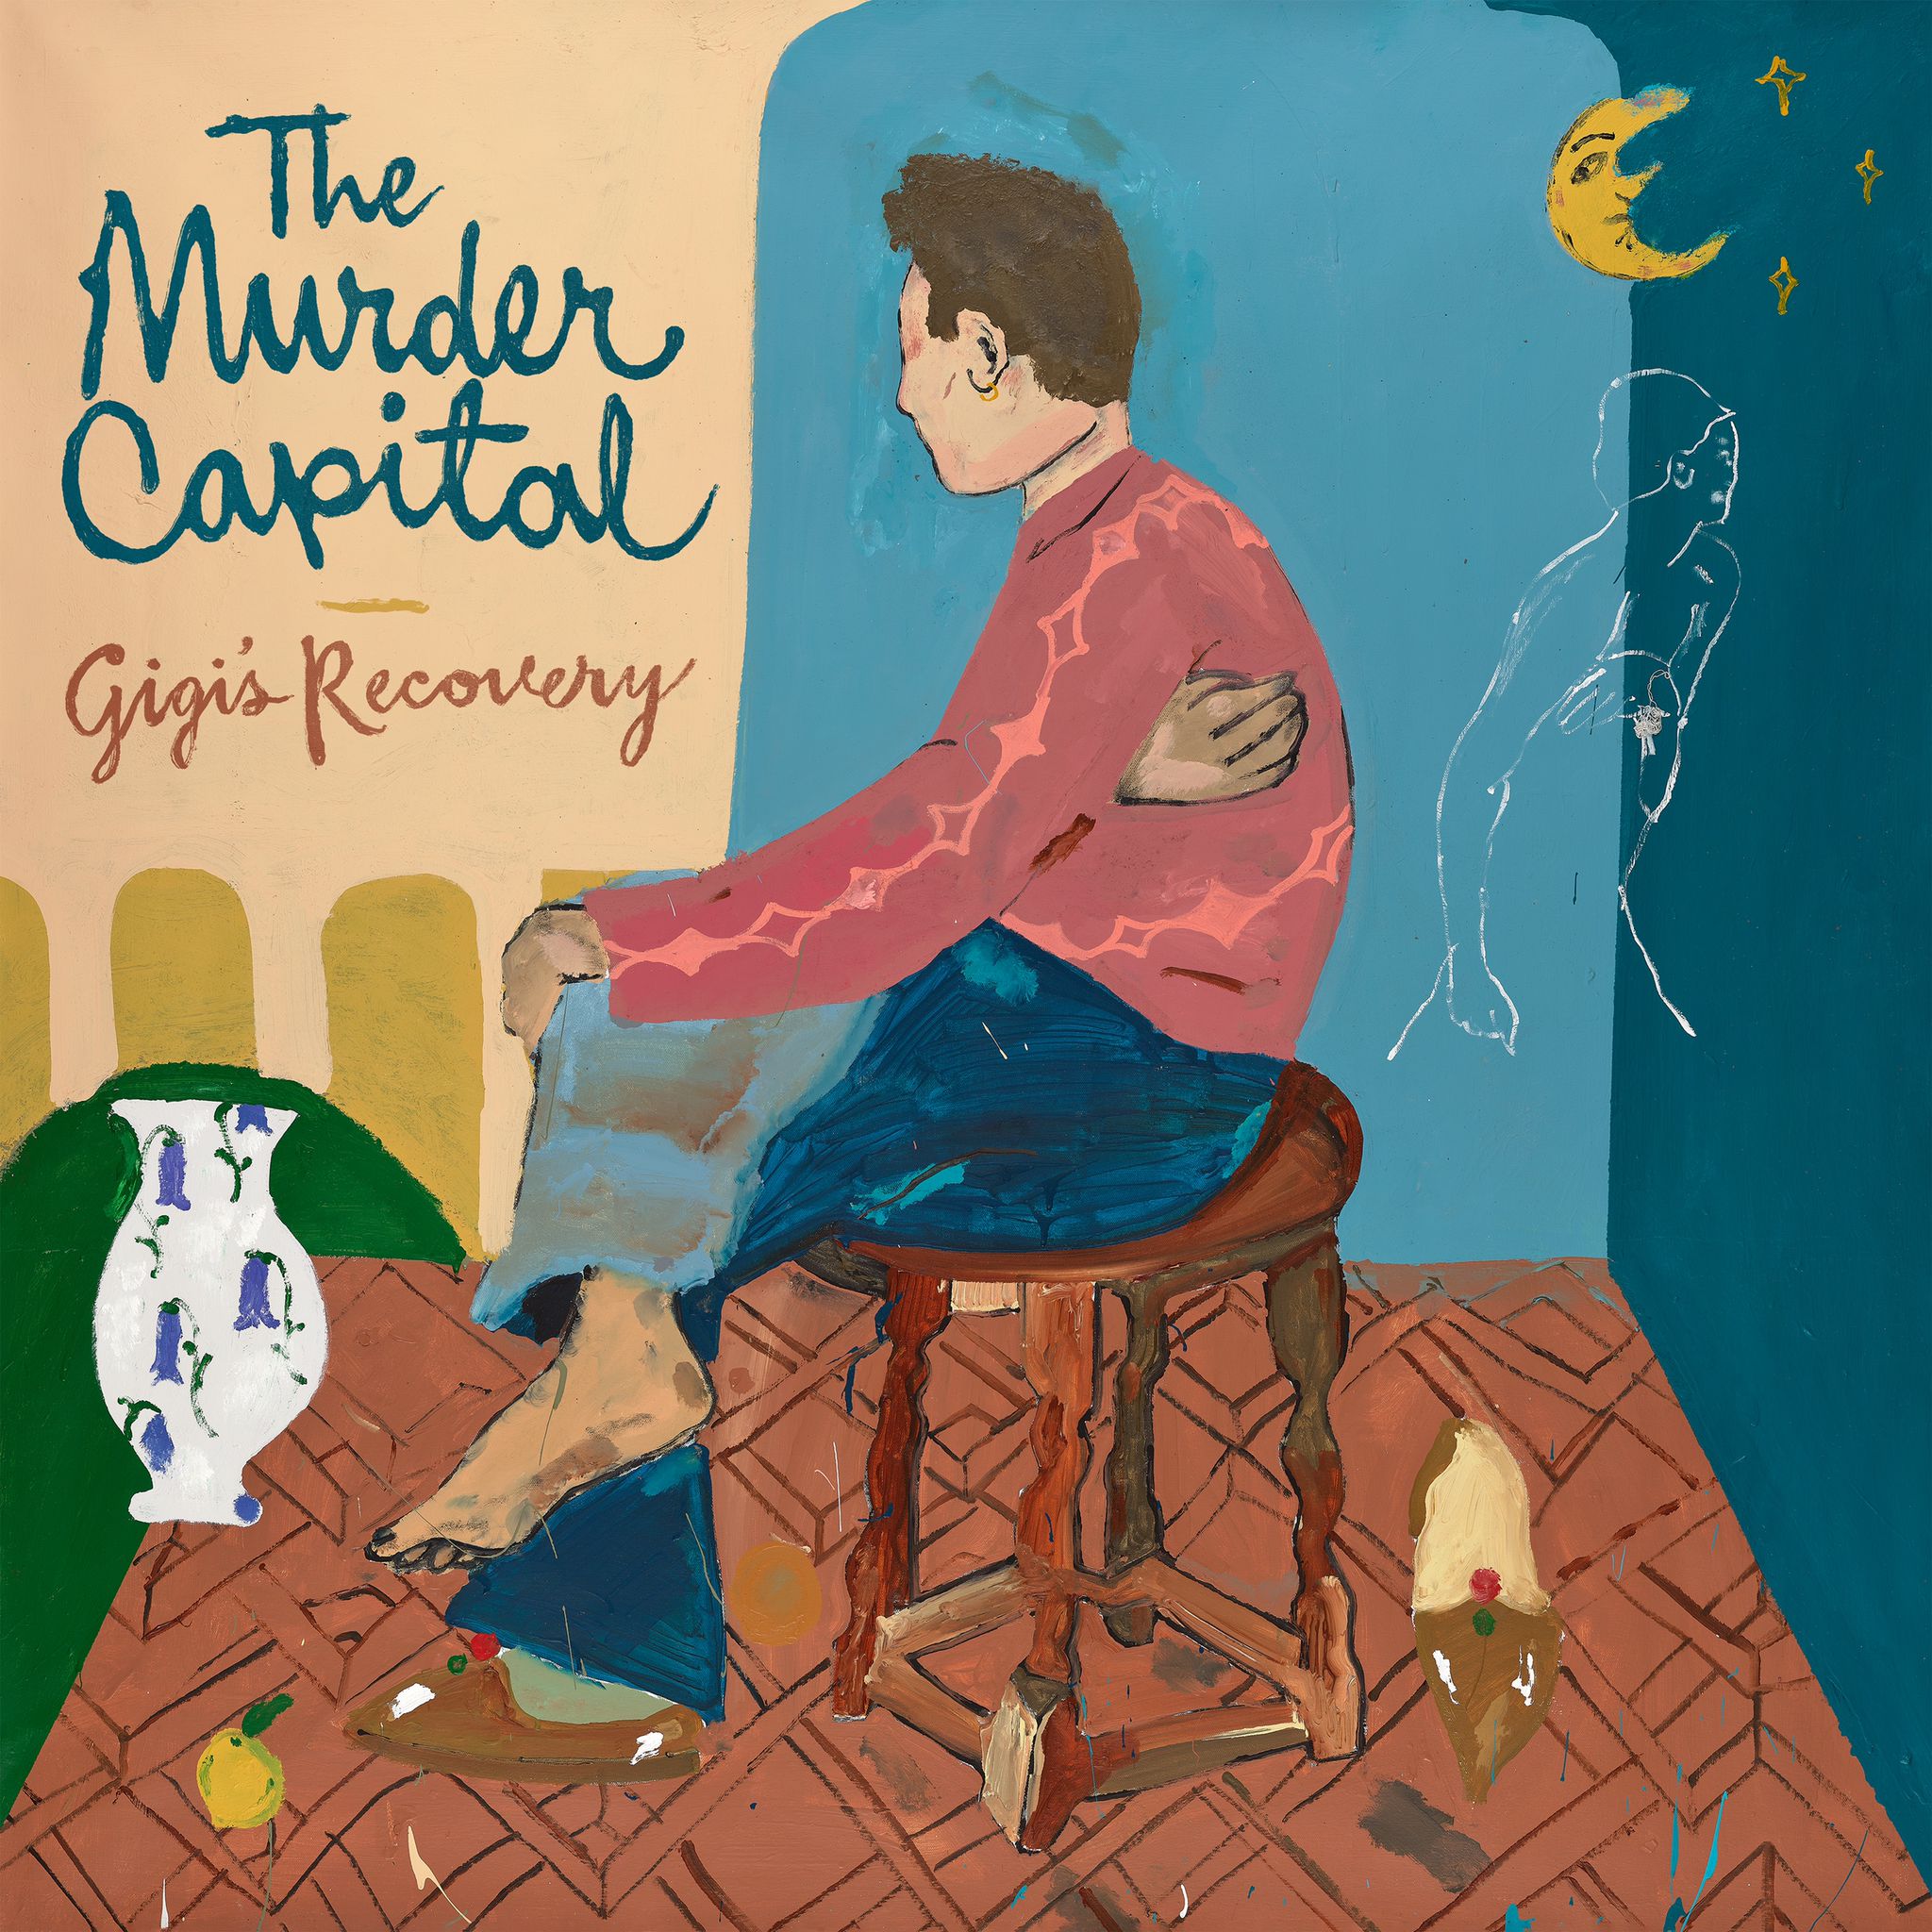 Post-punk shivers – The Murder Capital – Gigi’s Recovery